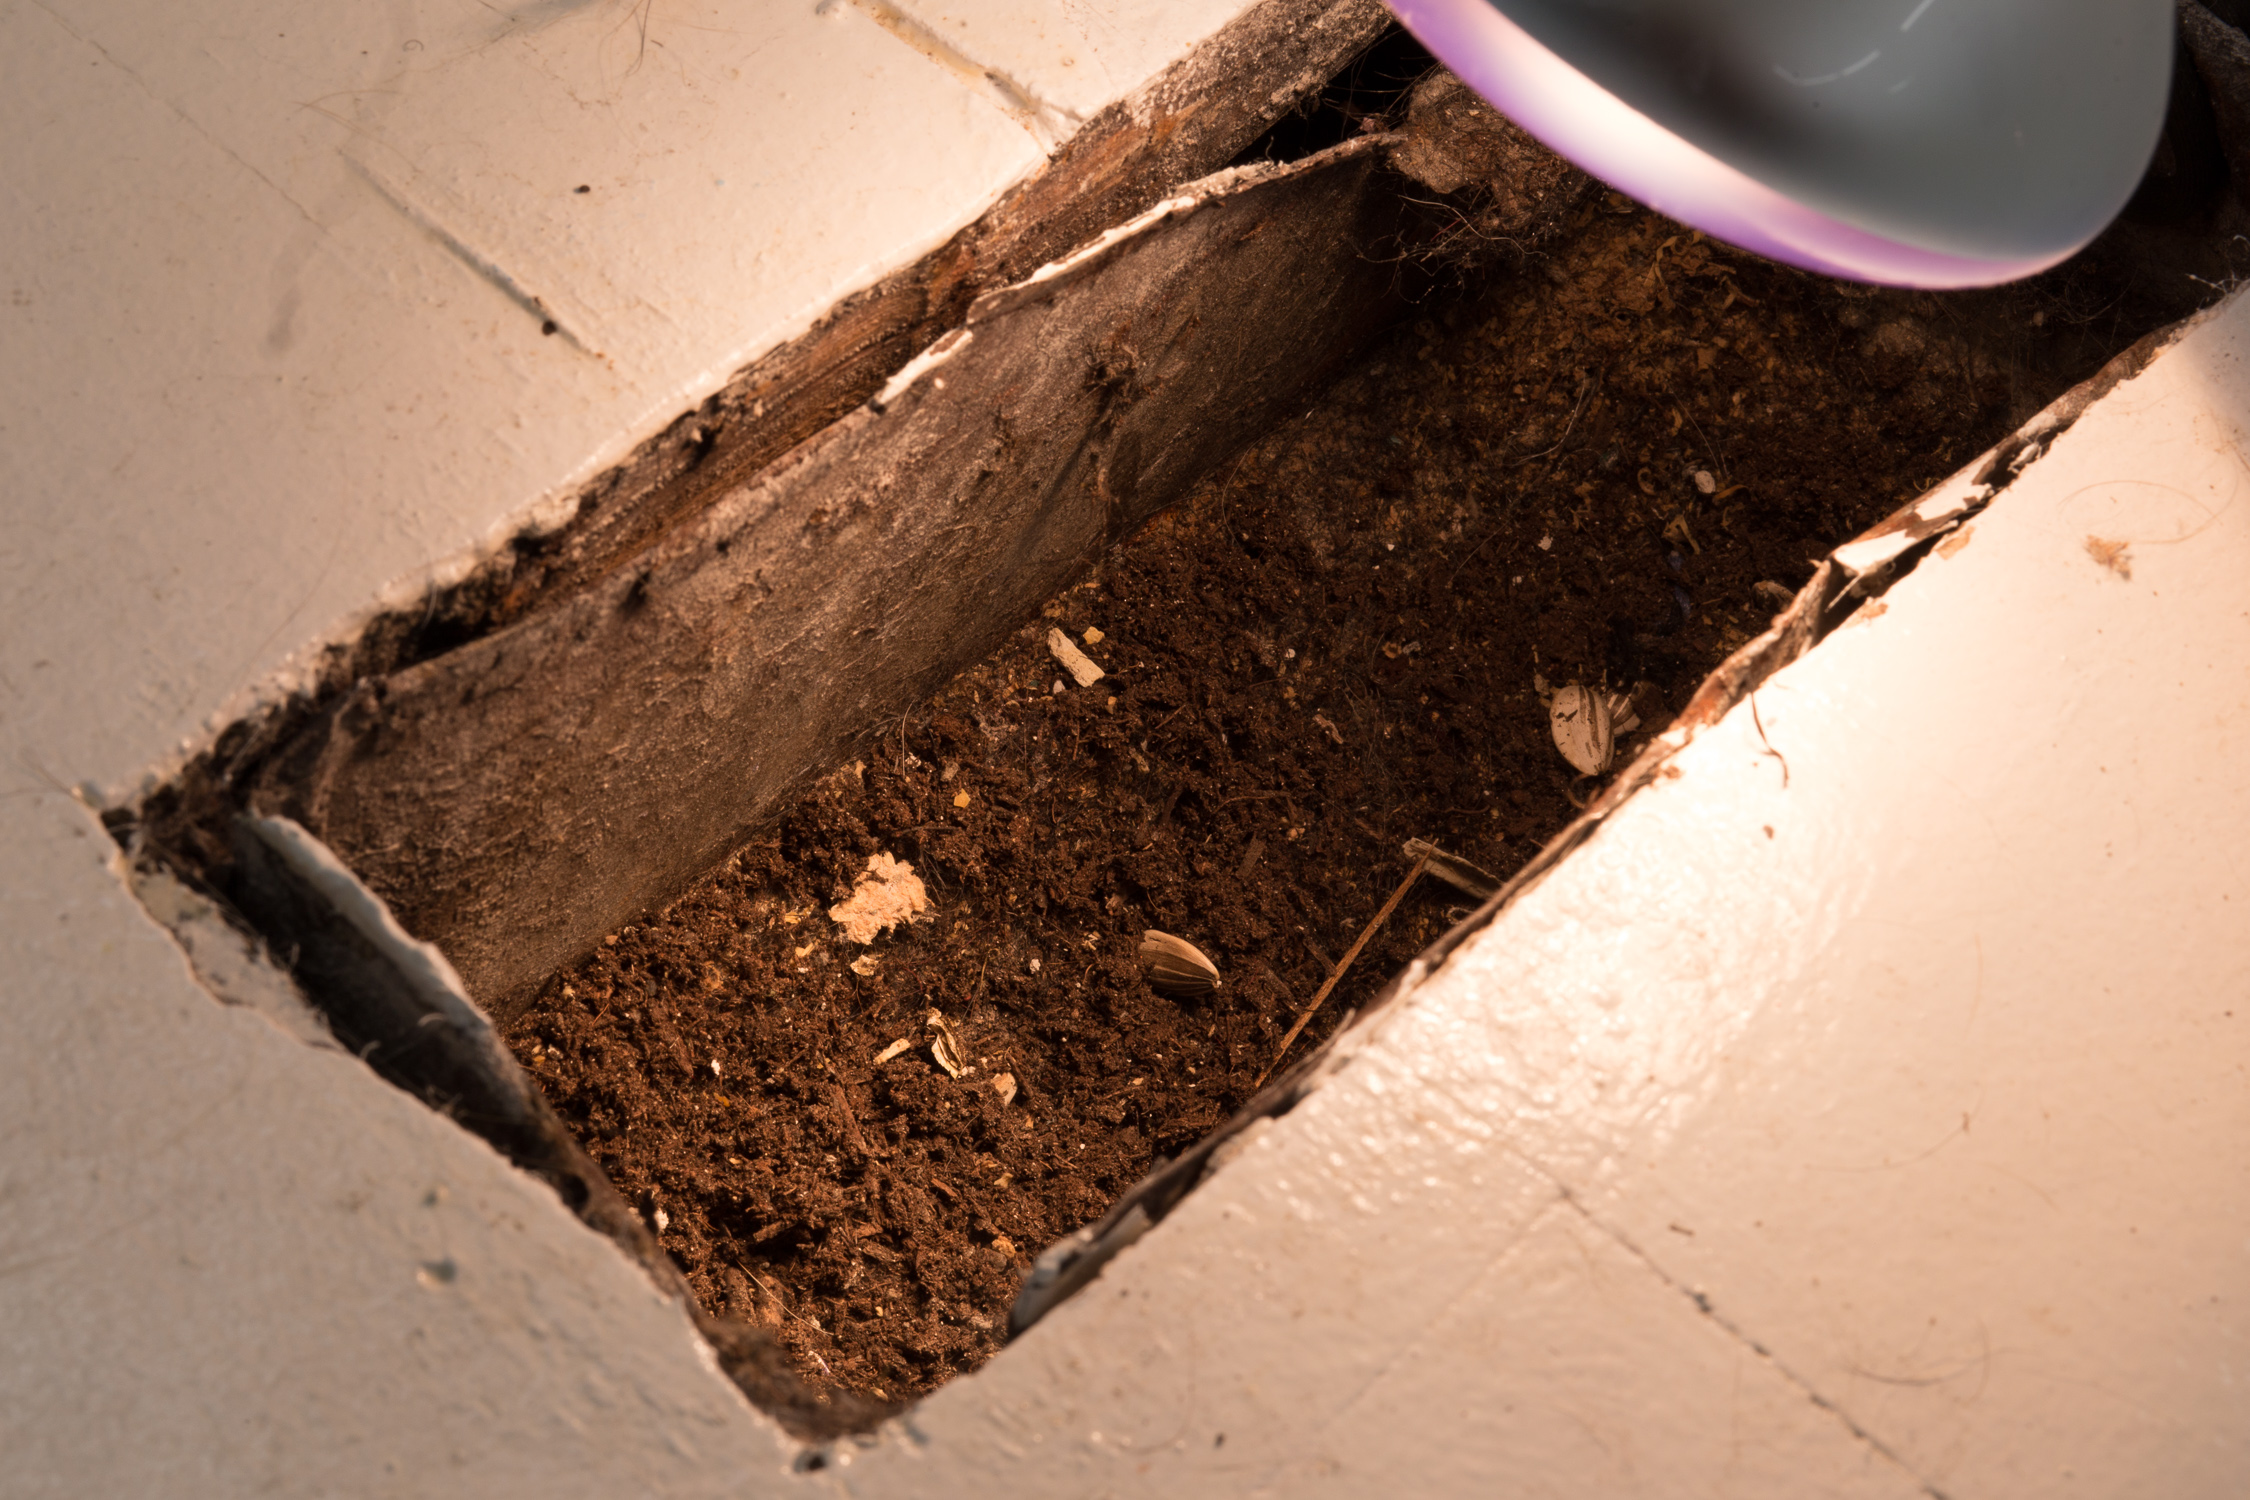 The vent is filled with soil, and has sunflower seeds in it